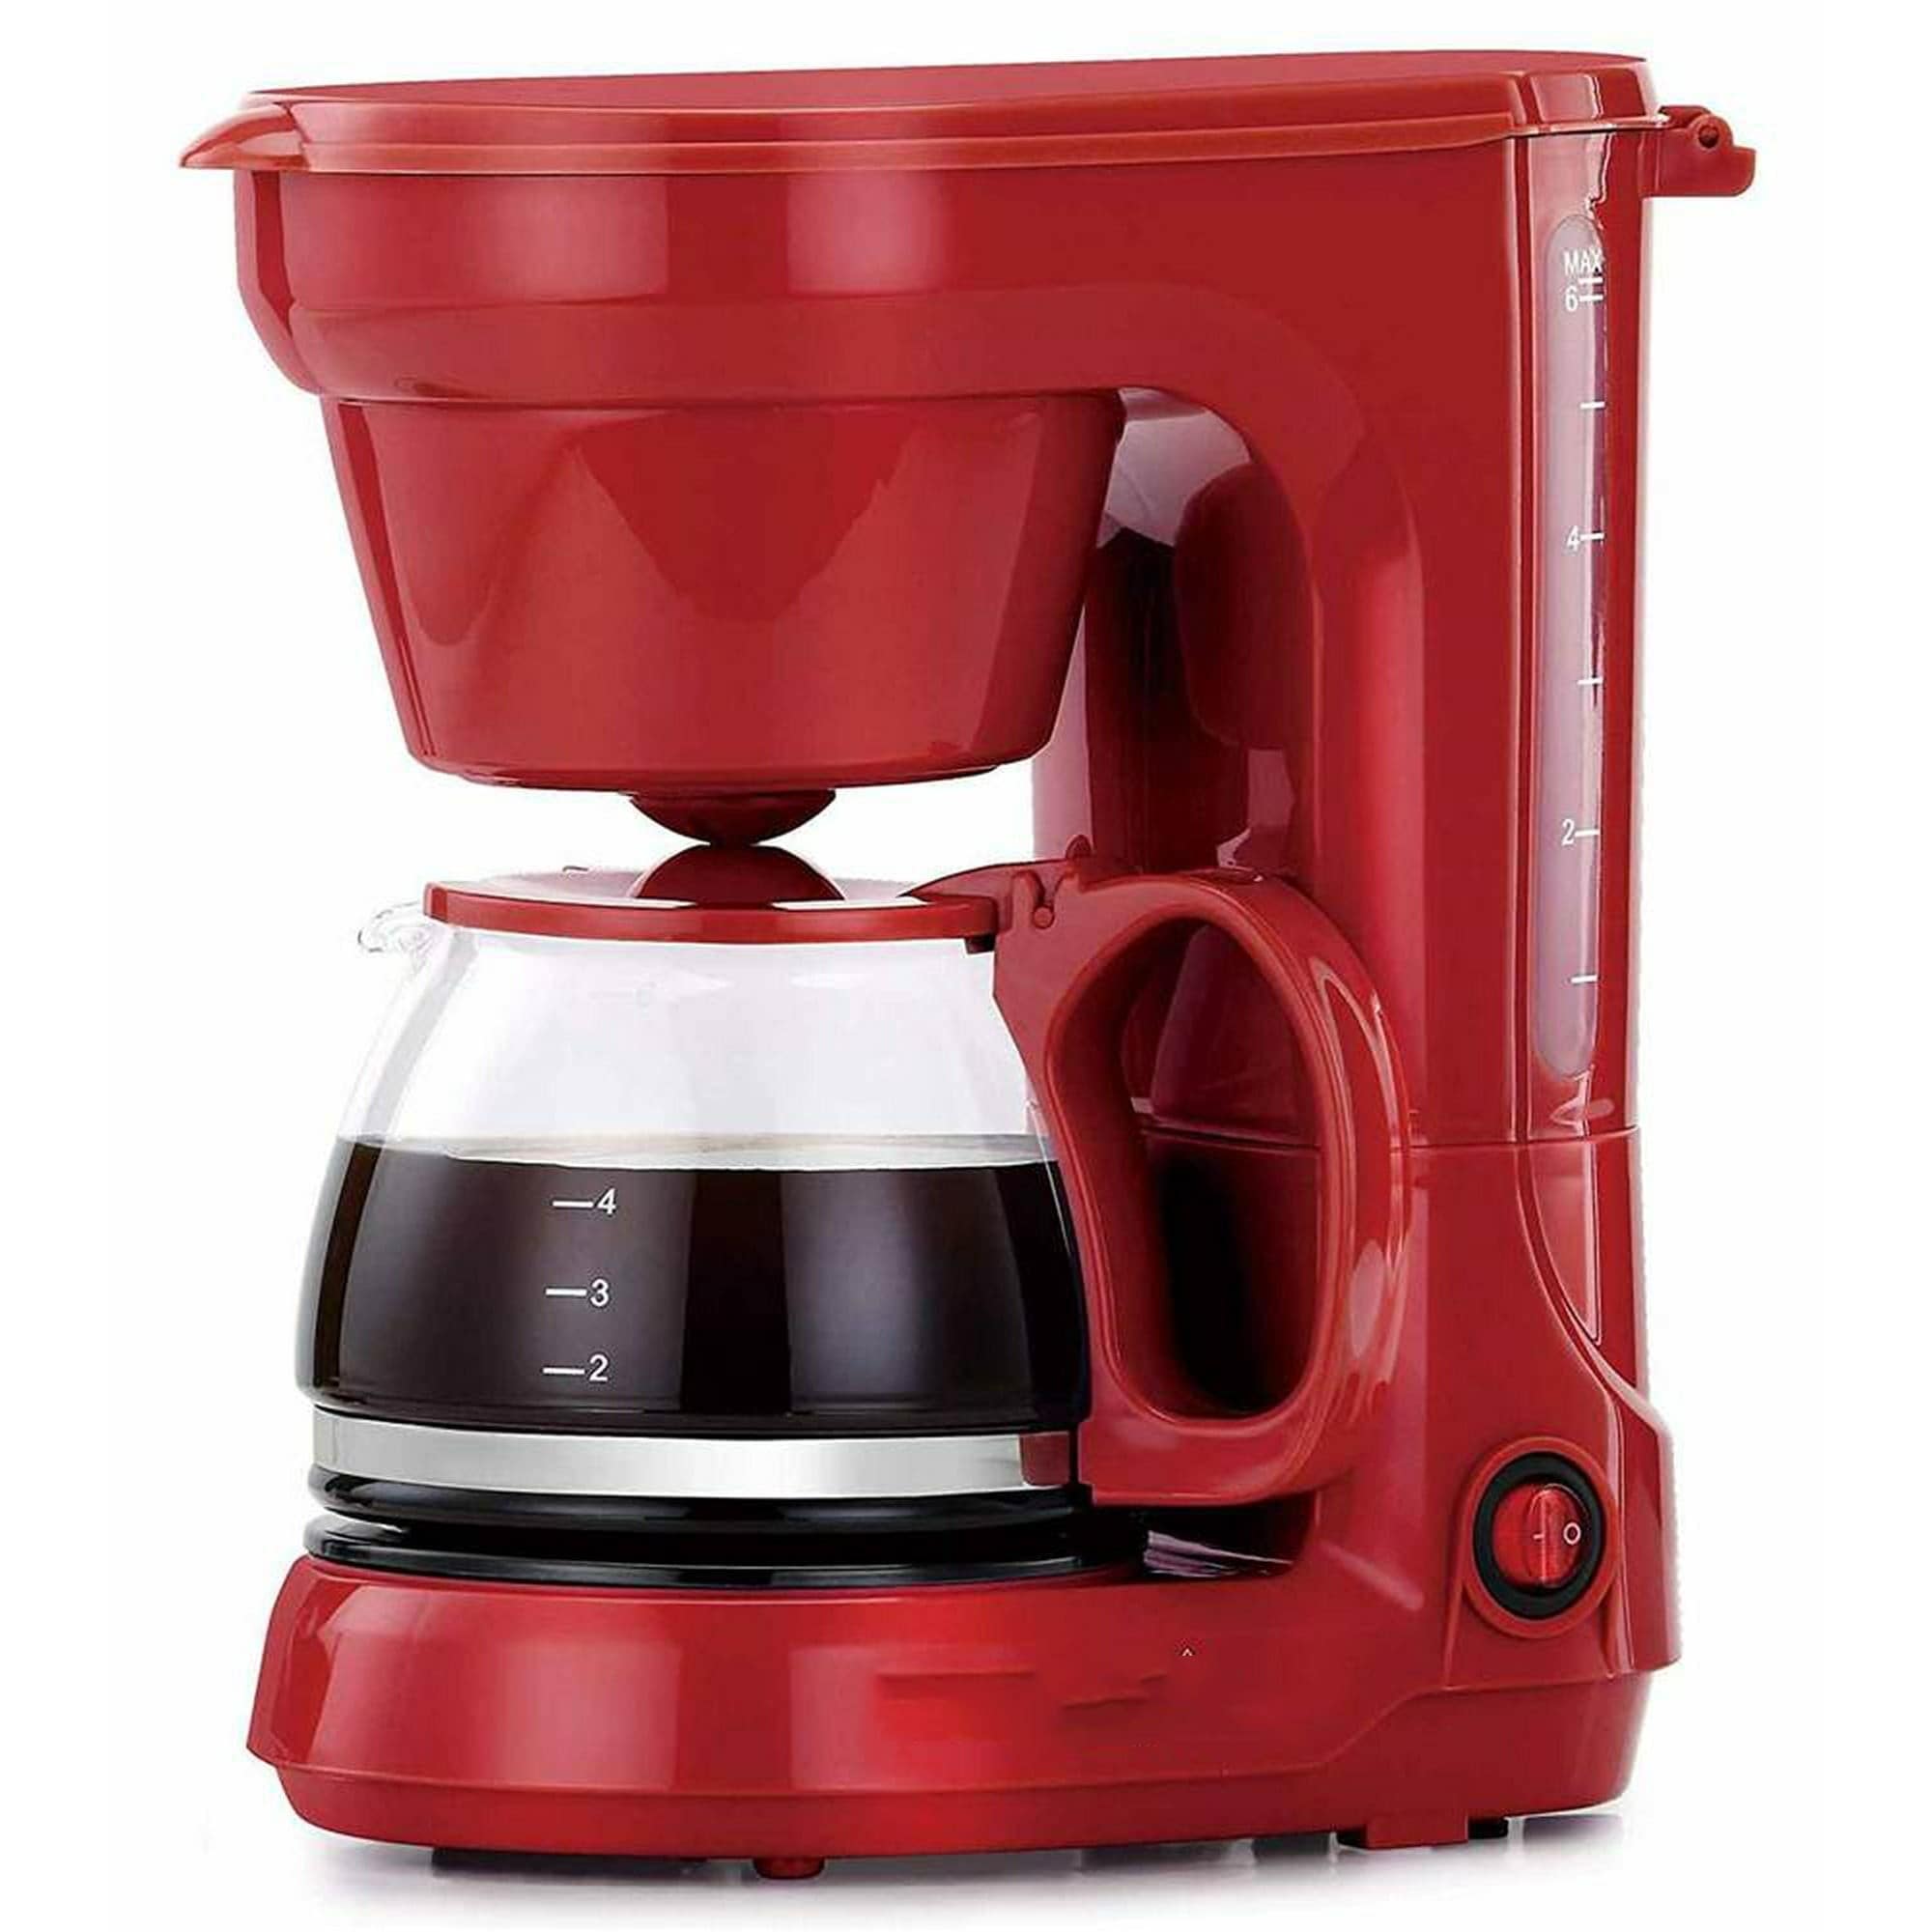 https://ak1.ostkcdn.com/images/products/is/images/direct/80aba9d4869500833ac7dc9c1724f6b8a76d5c43/5CUP-Coffee-Maker---Space-Saving-Design%2C-Auto-Pause-and-Serve%2C-Removable-Filter-Basket%2C-BLACK.jpg